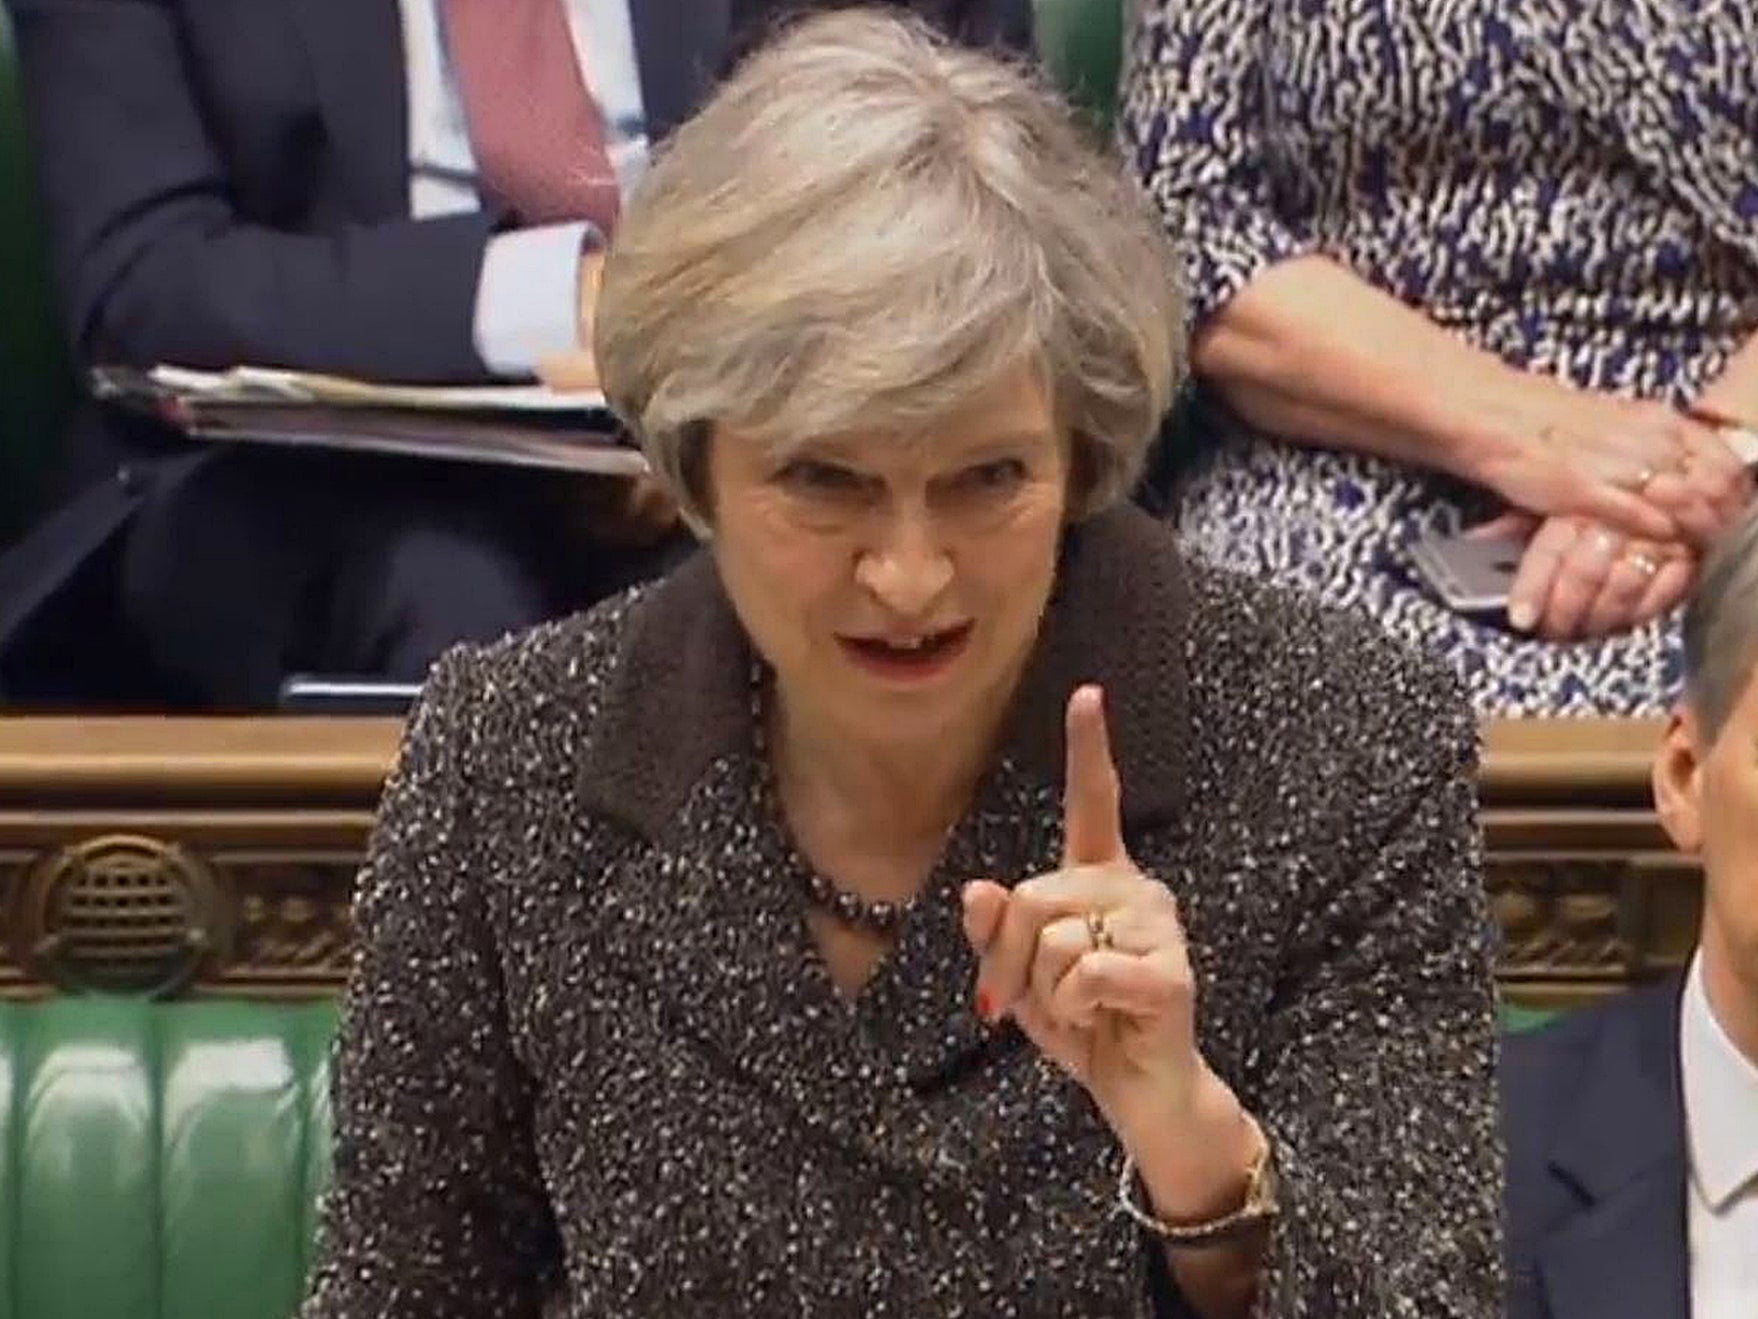 Theresa May can now move forward with Brexit after the Bill passed through the Commons